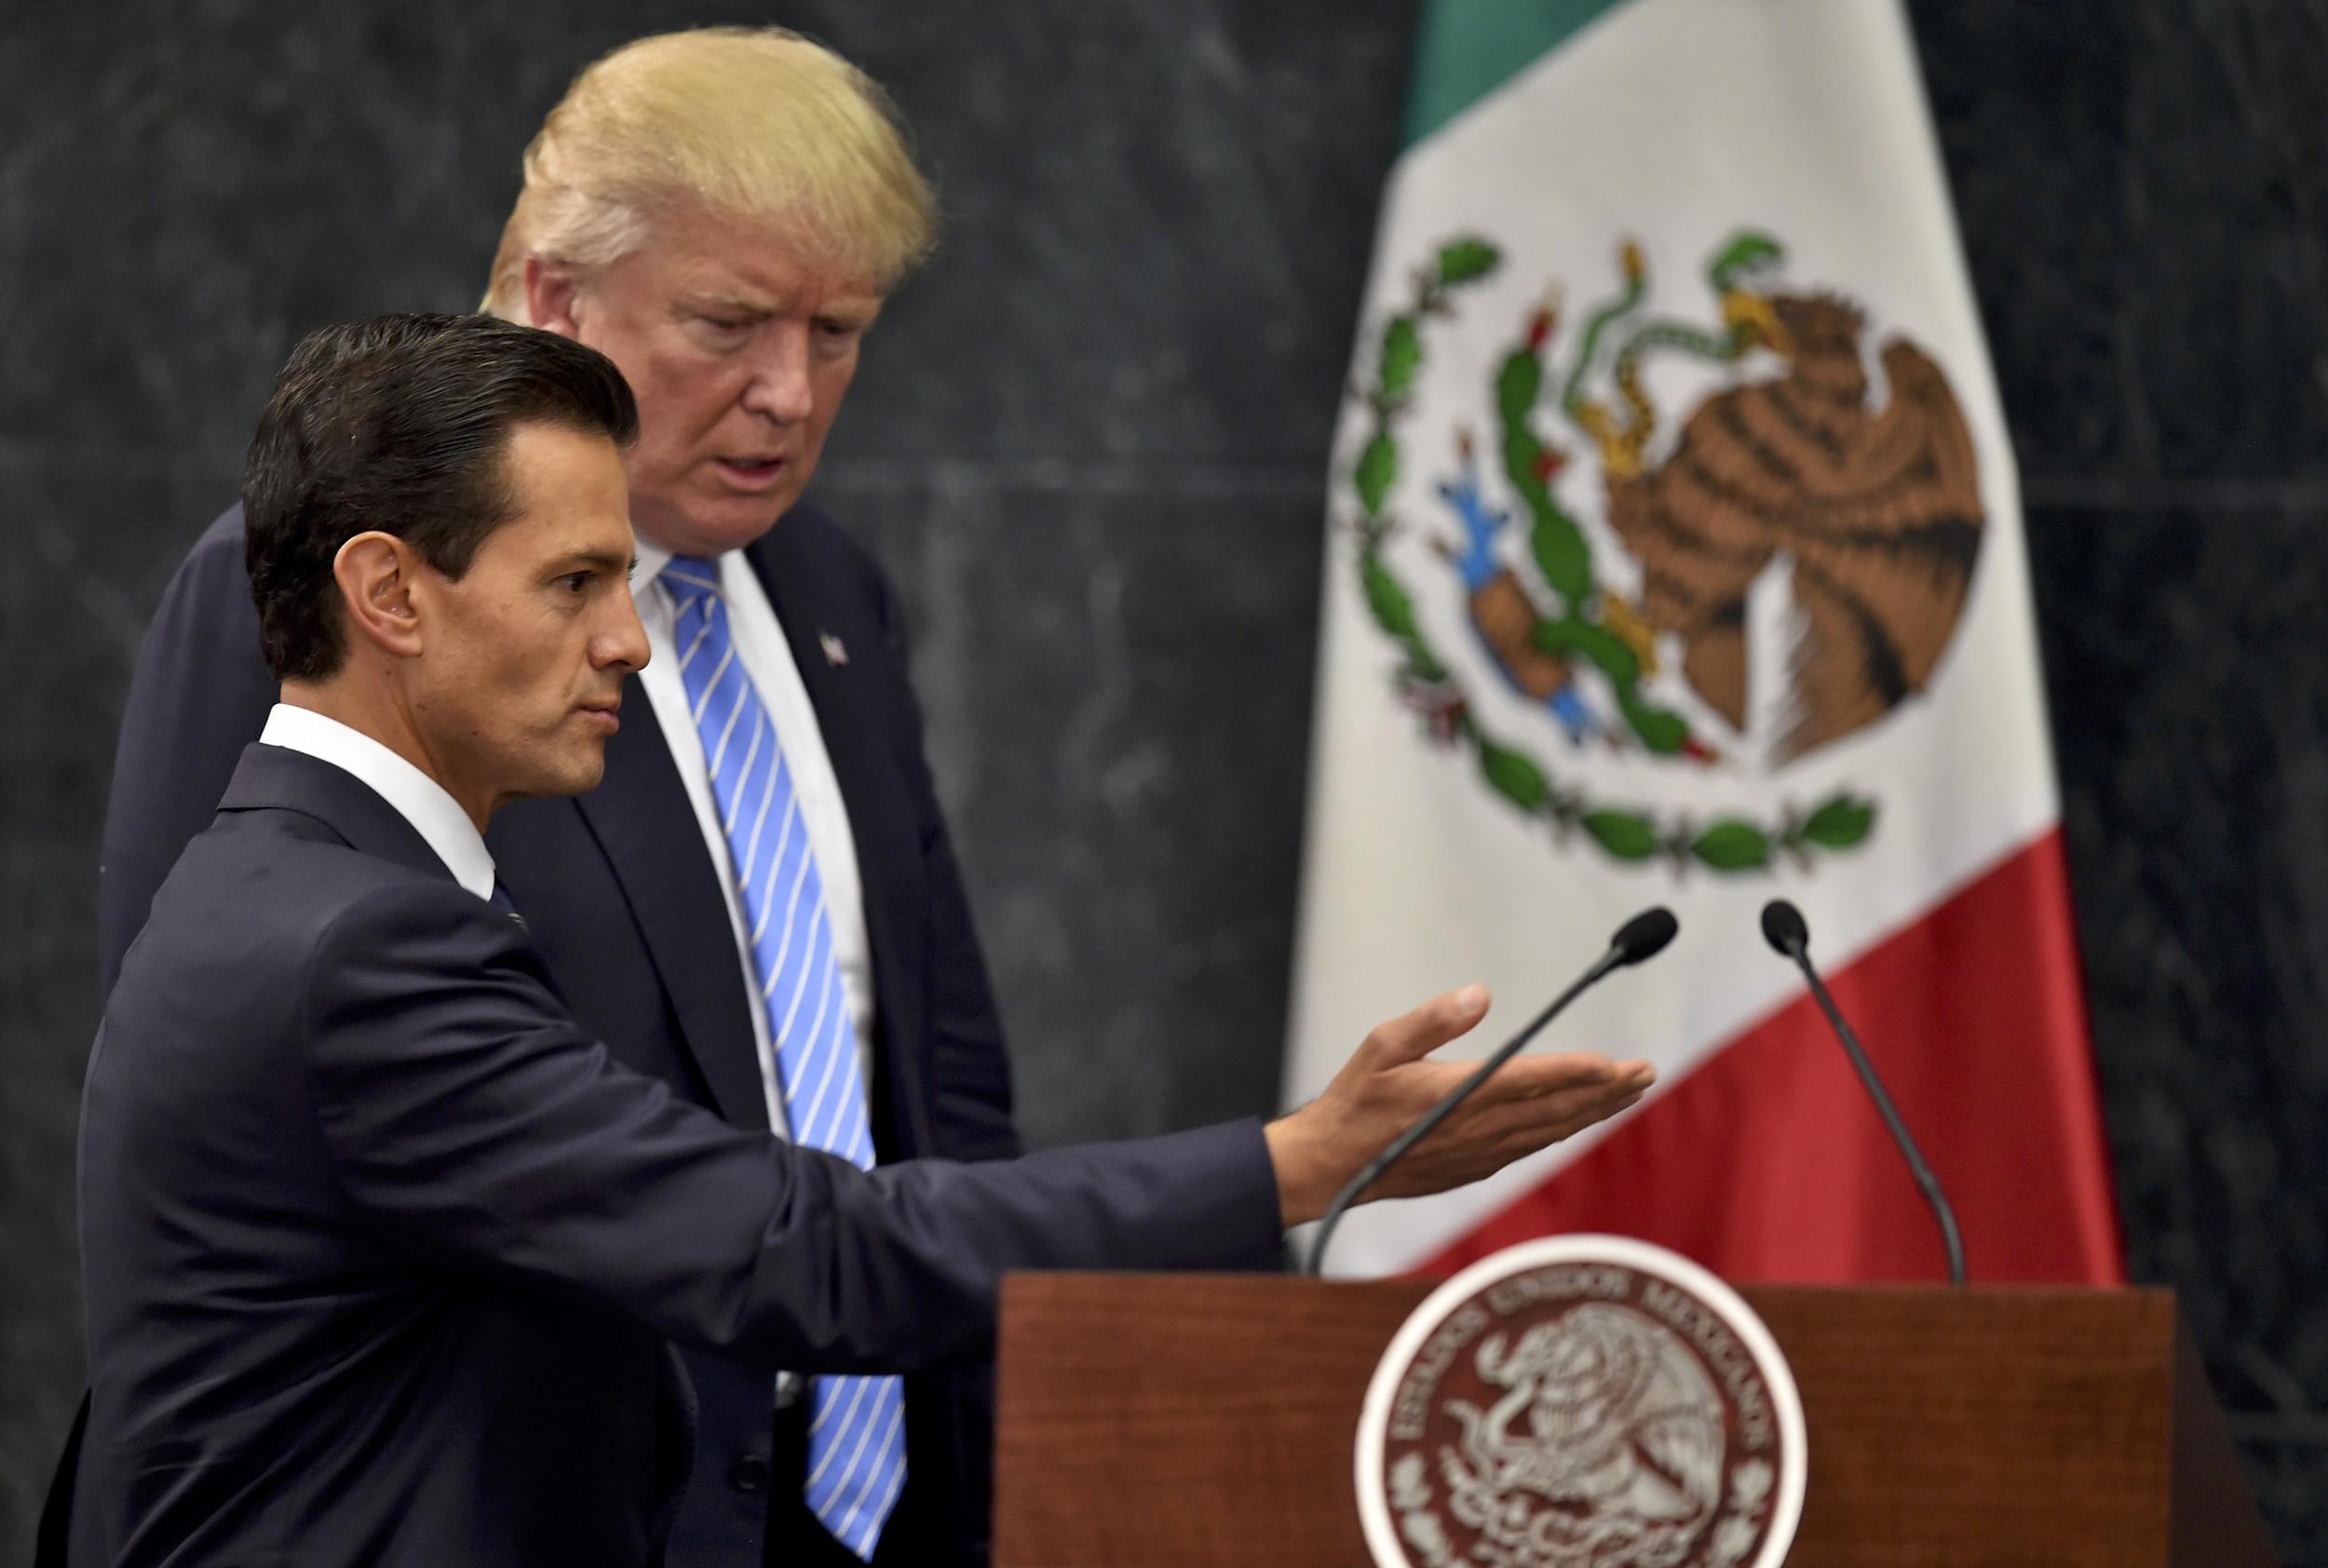 Donald Trump (R) and Mexican President Enrique Pena Nieto delivered a joint press conference in Mexico City before the election